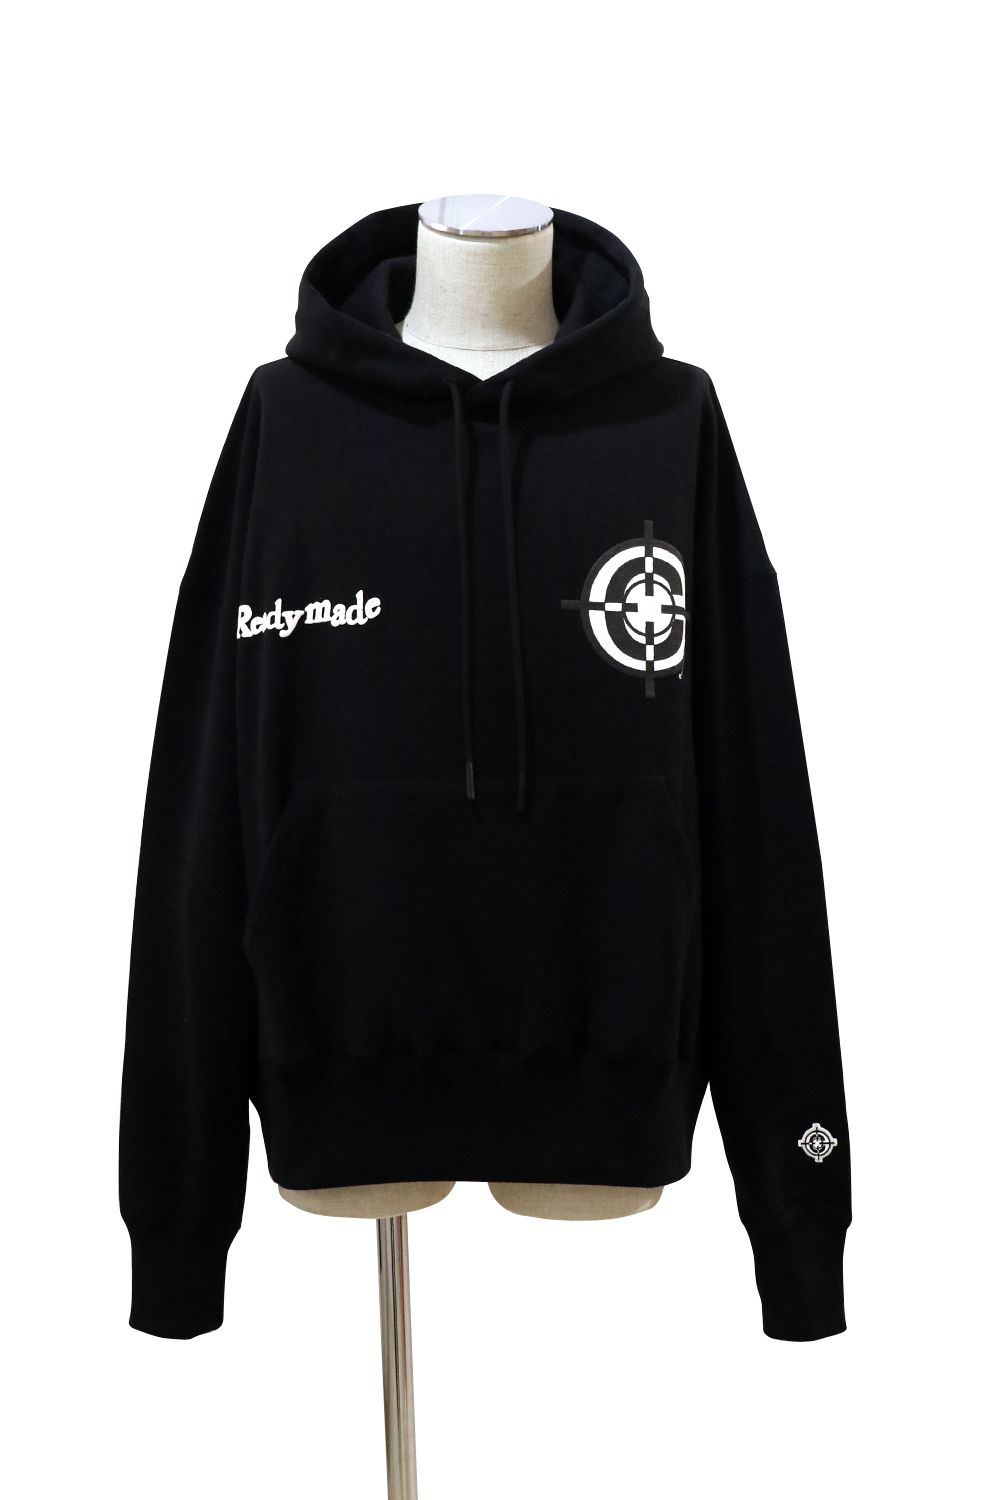 READY MADE レディメイド 22AW CLF TARGET HOODIE ターゲット デザイン ...